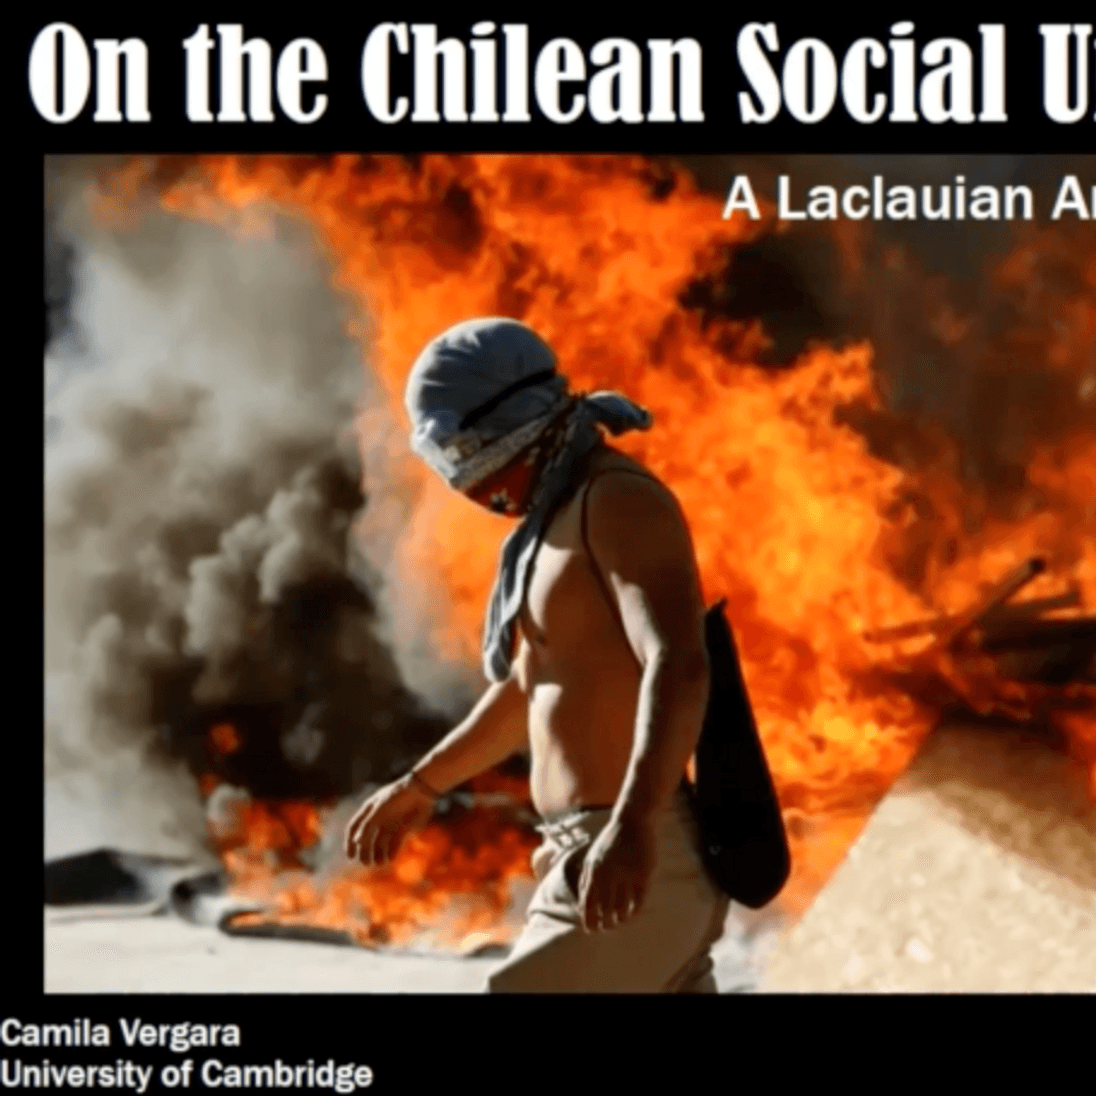 Image of On the Chilean Social Unrest – A Laclauian Analysis by Camila Vergara